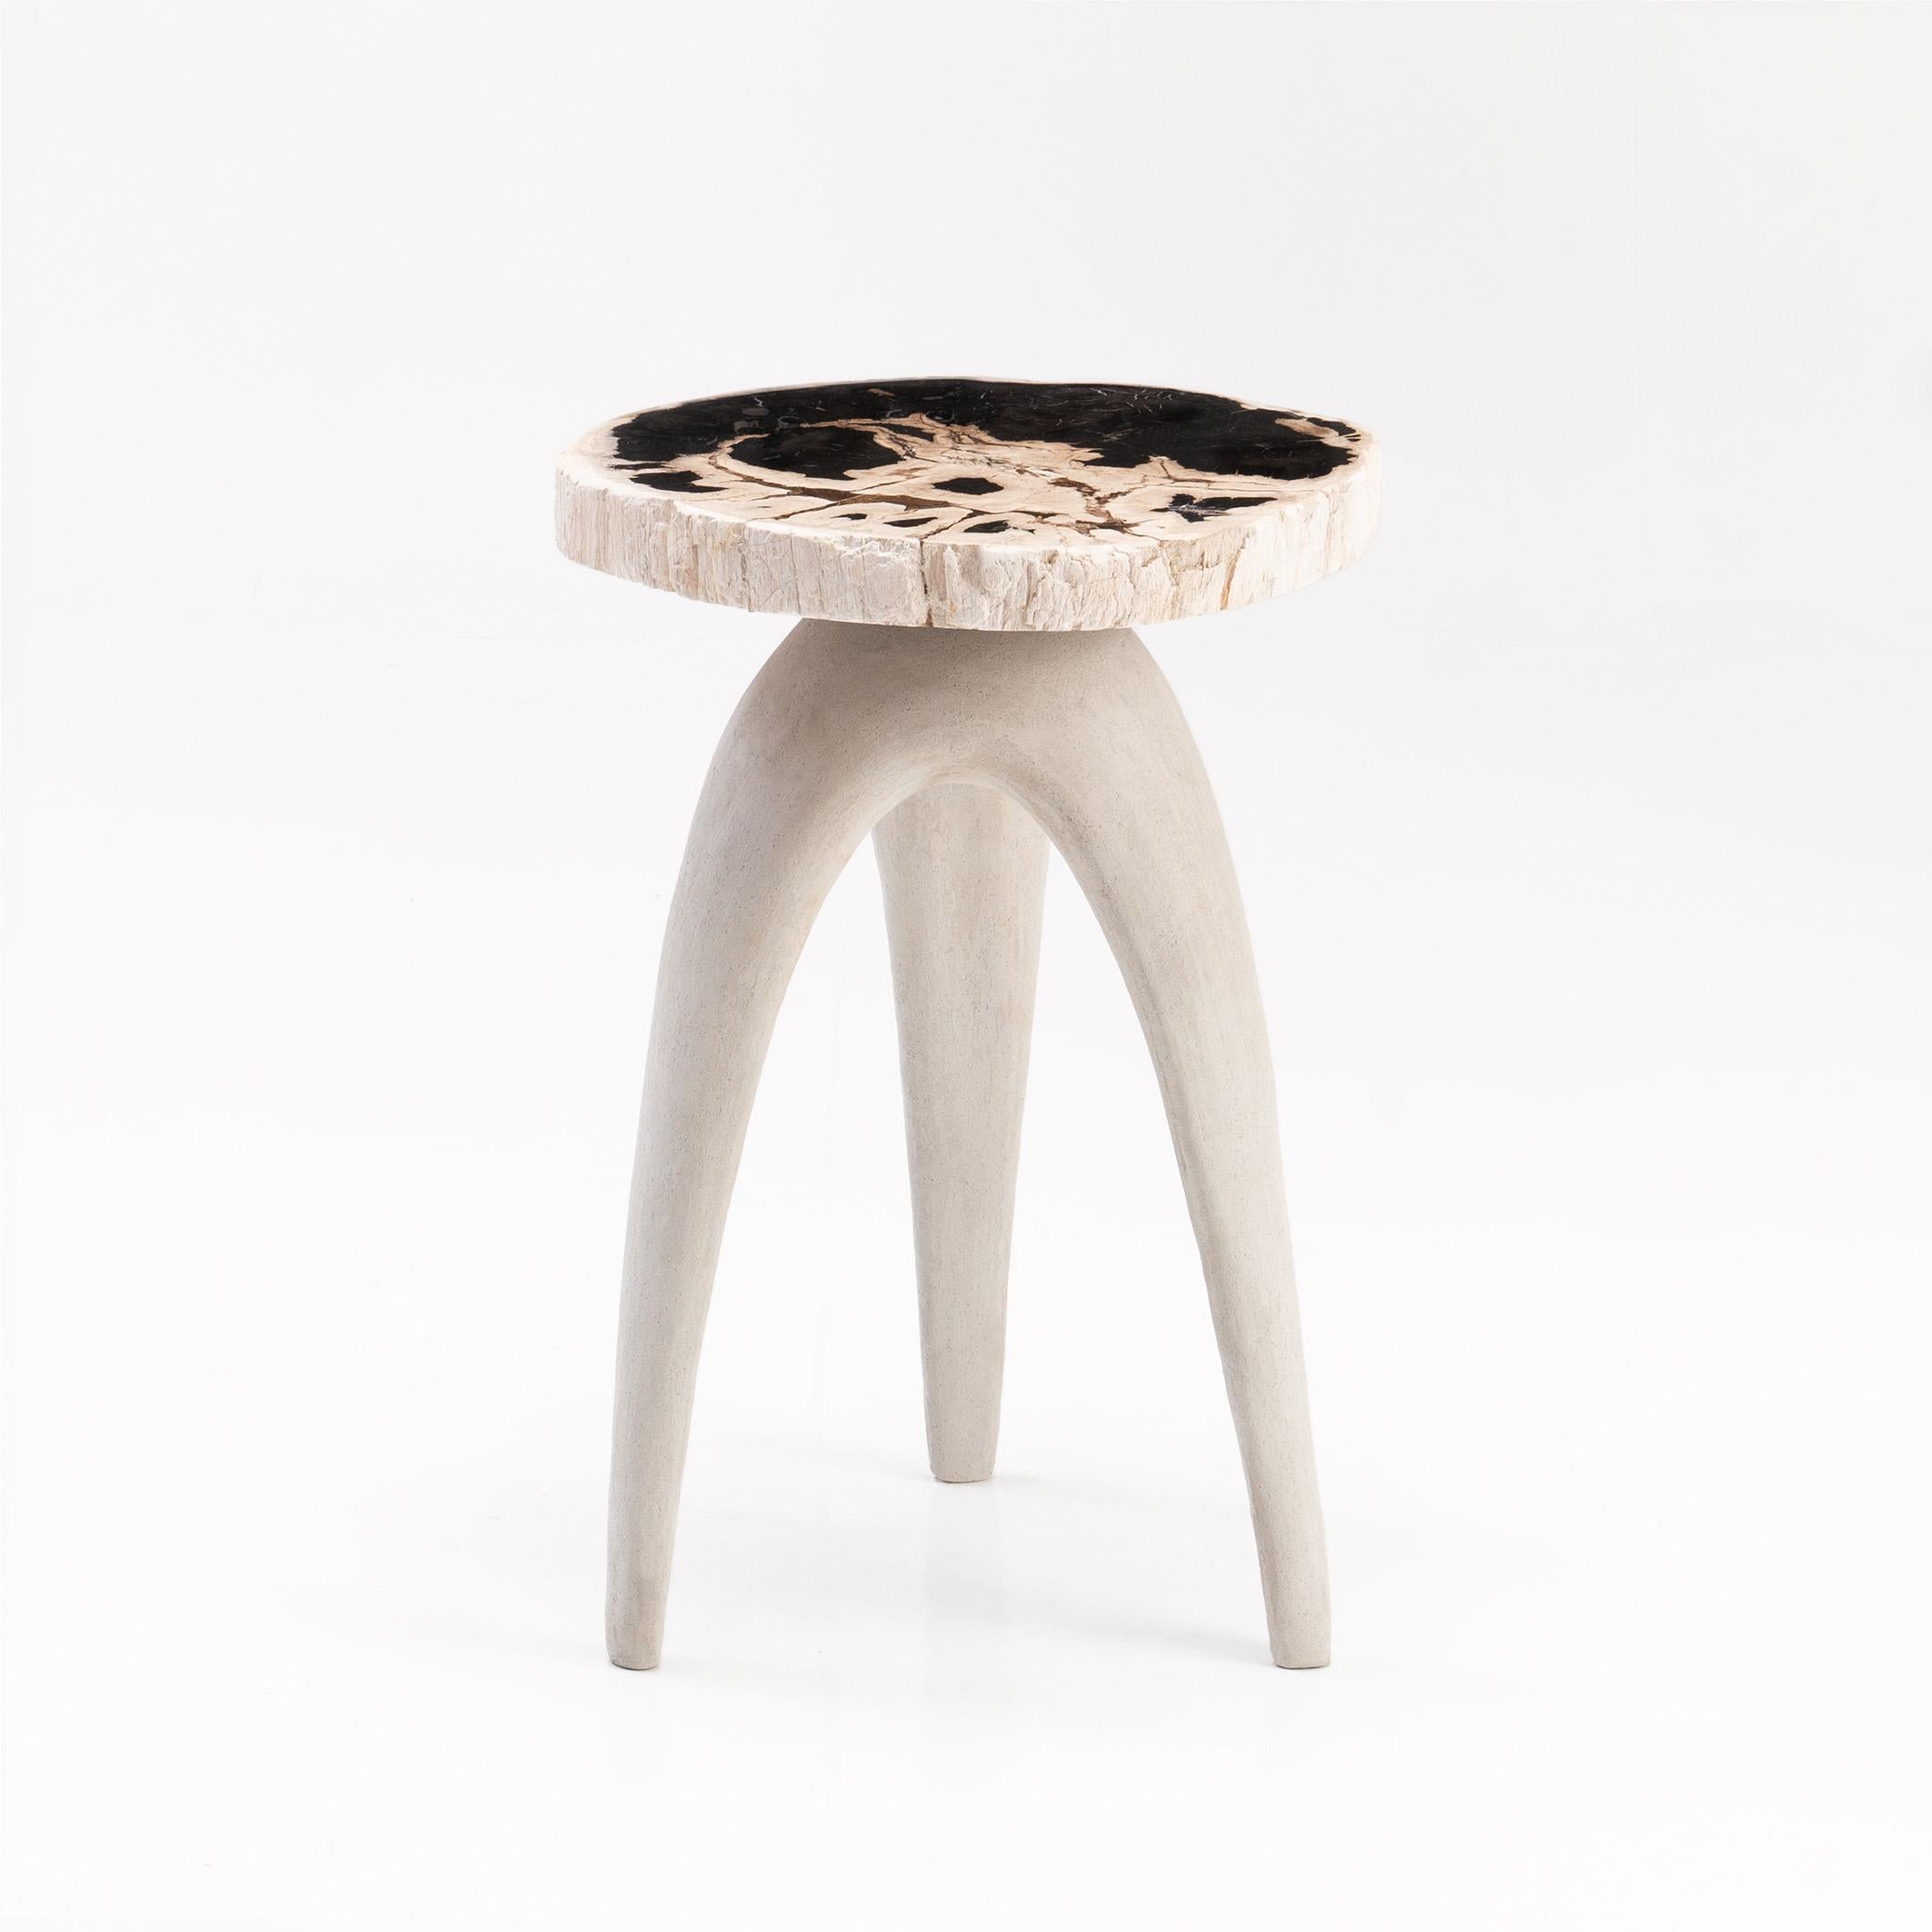 The ‘Bermuda Love Triangle’ sculptural side-table features a solid petrified wood top, perched upon an organic shaped tripod base handmade from limestone composite.

Petrified wood is created from fossilised trees transformed into stone by a